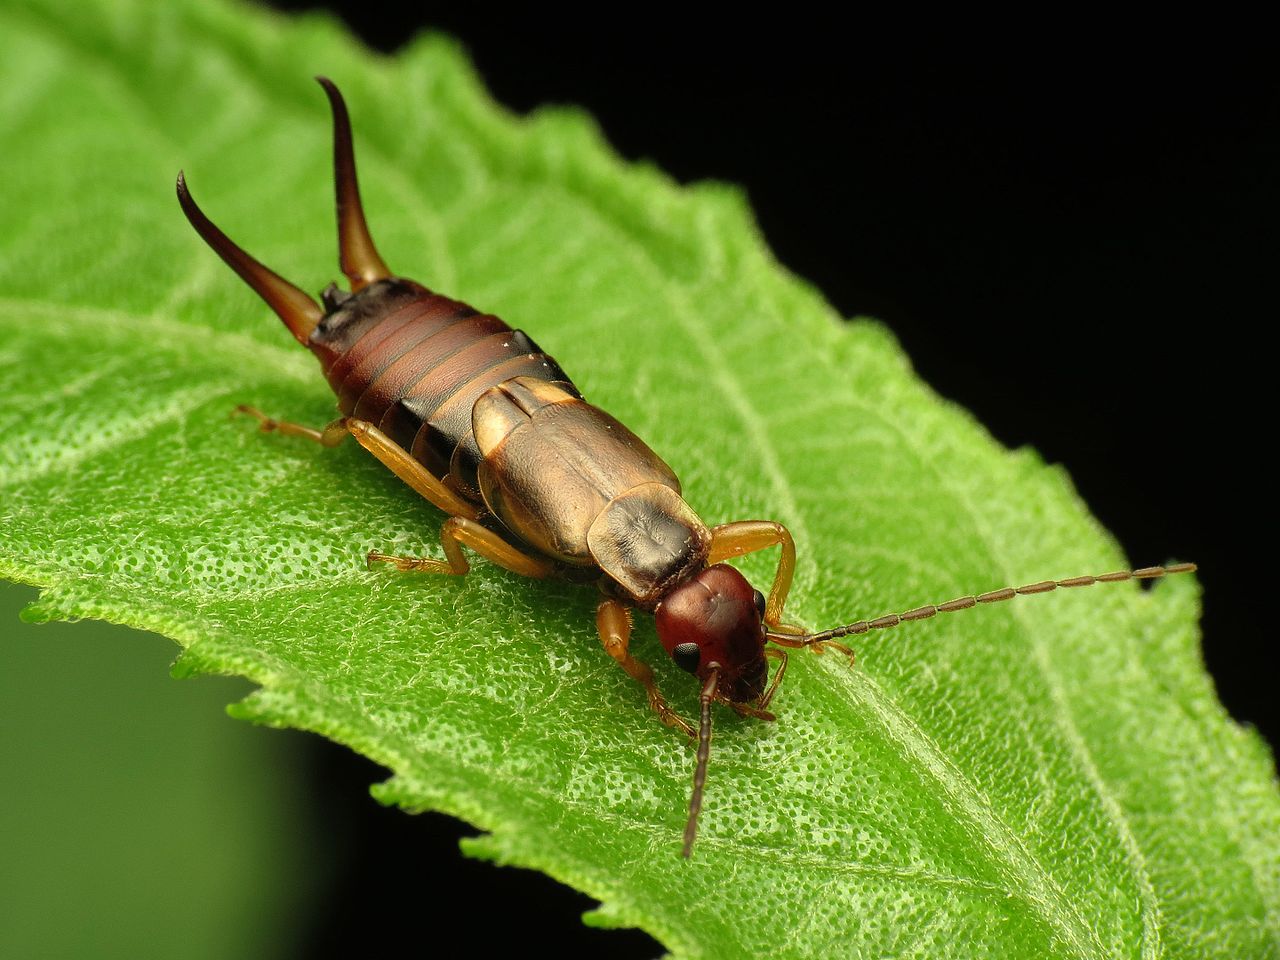 From Iceland – Autumn is coming: It’s Earwig Season Again